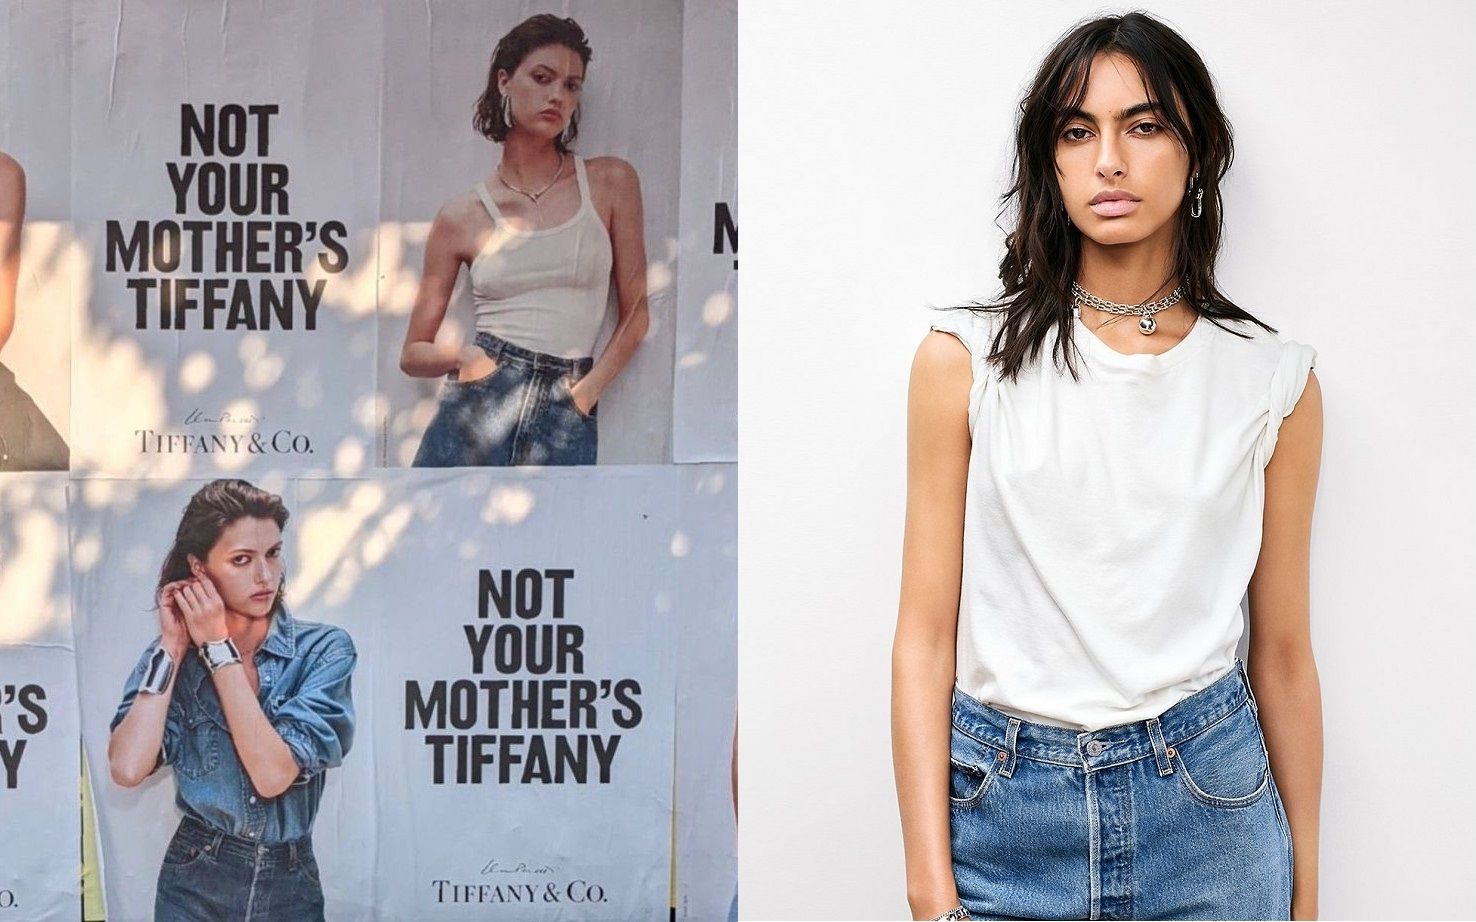 Not Your Mother's Tiffany - The Brand's Attempt to Interest a